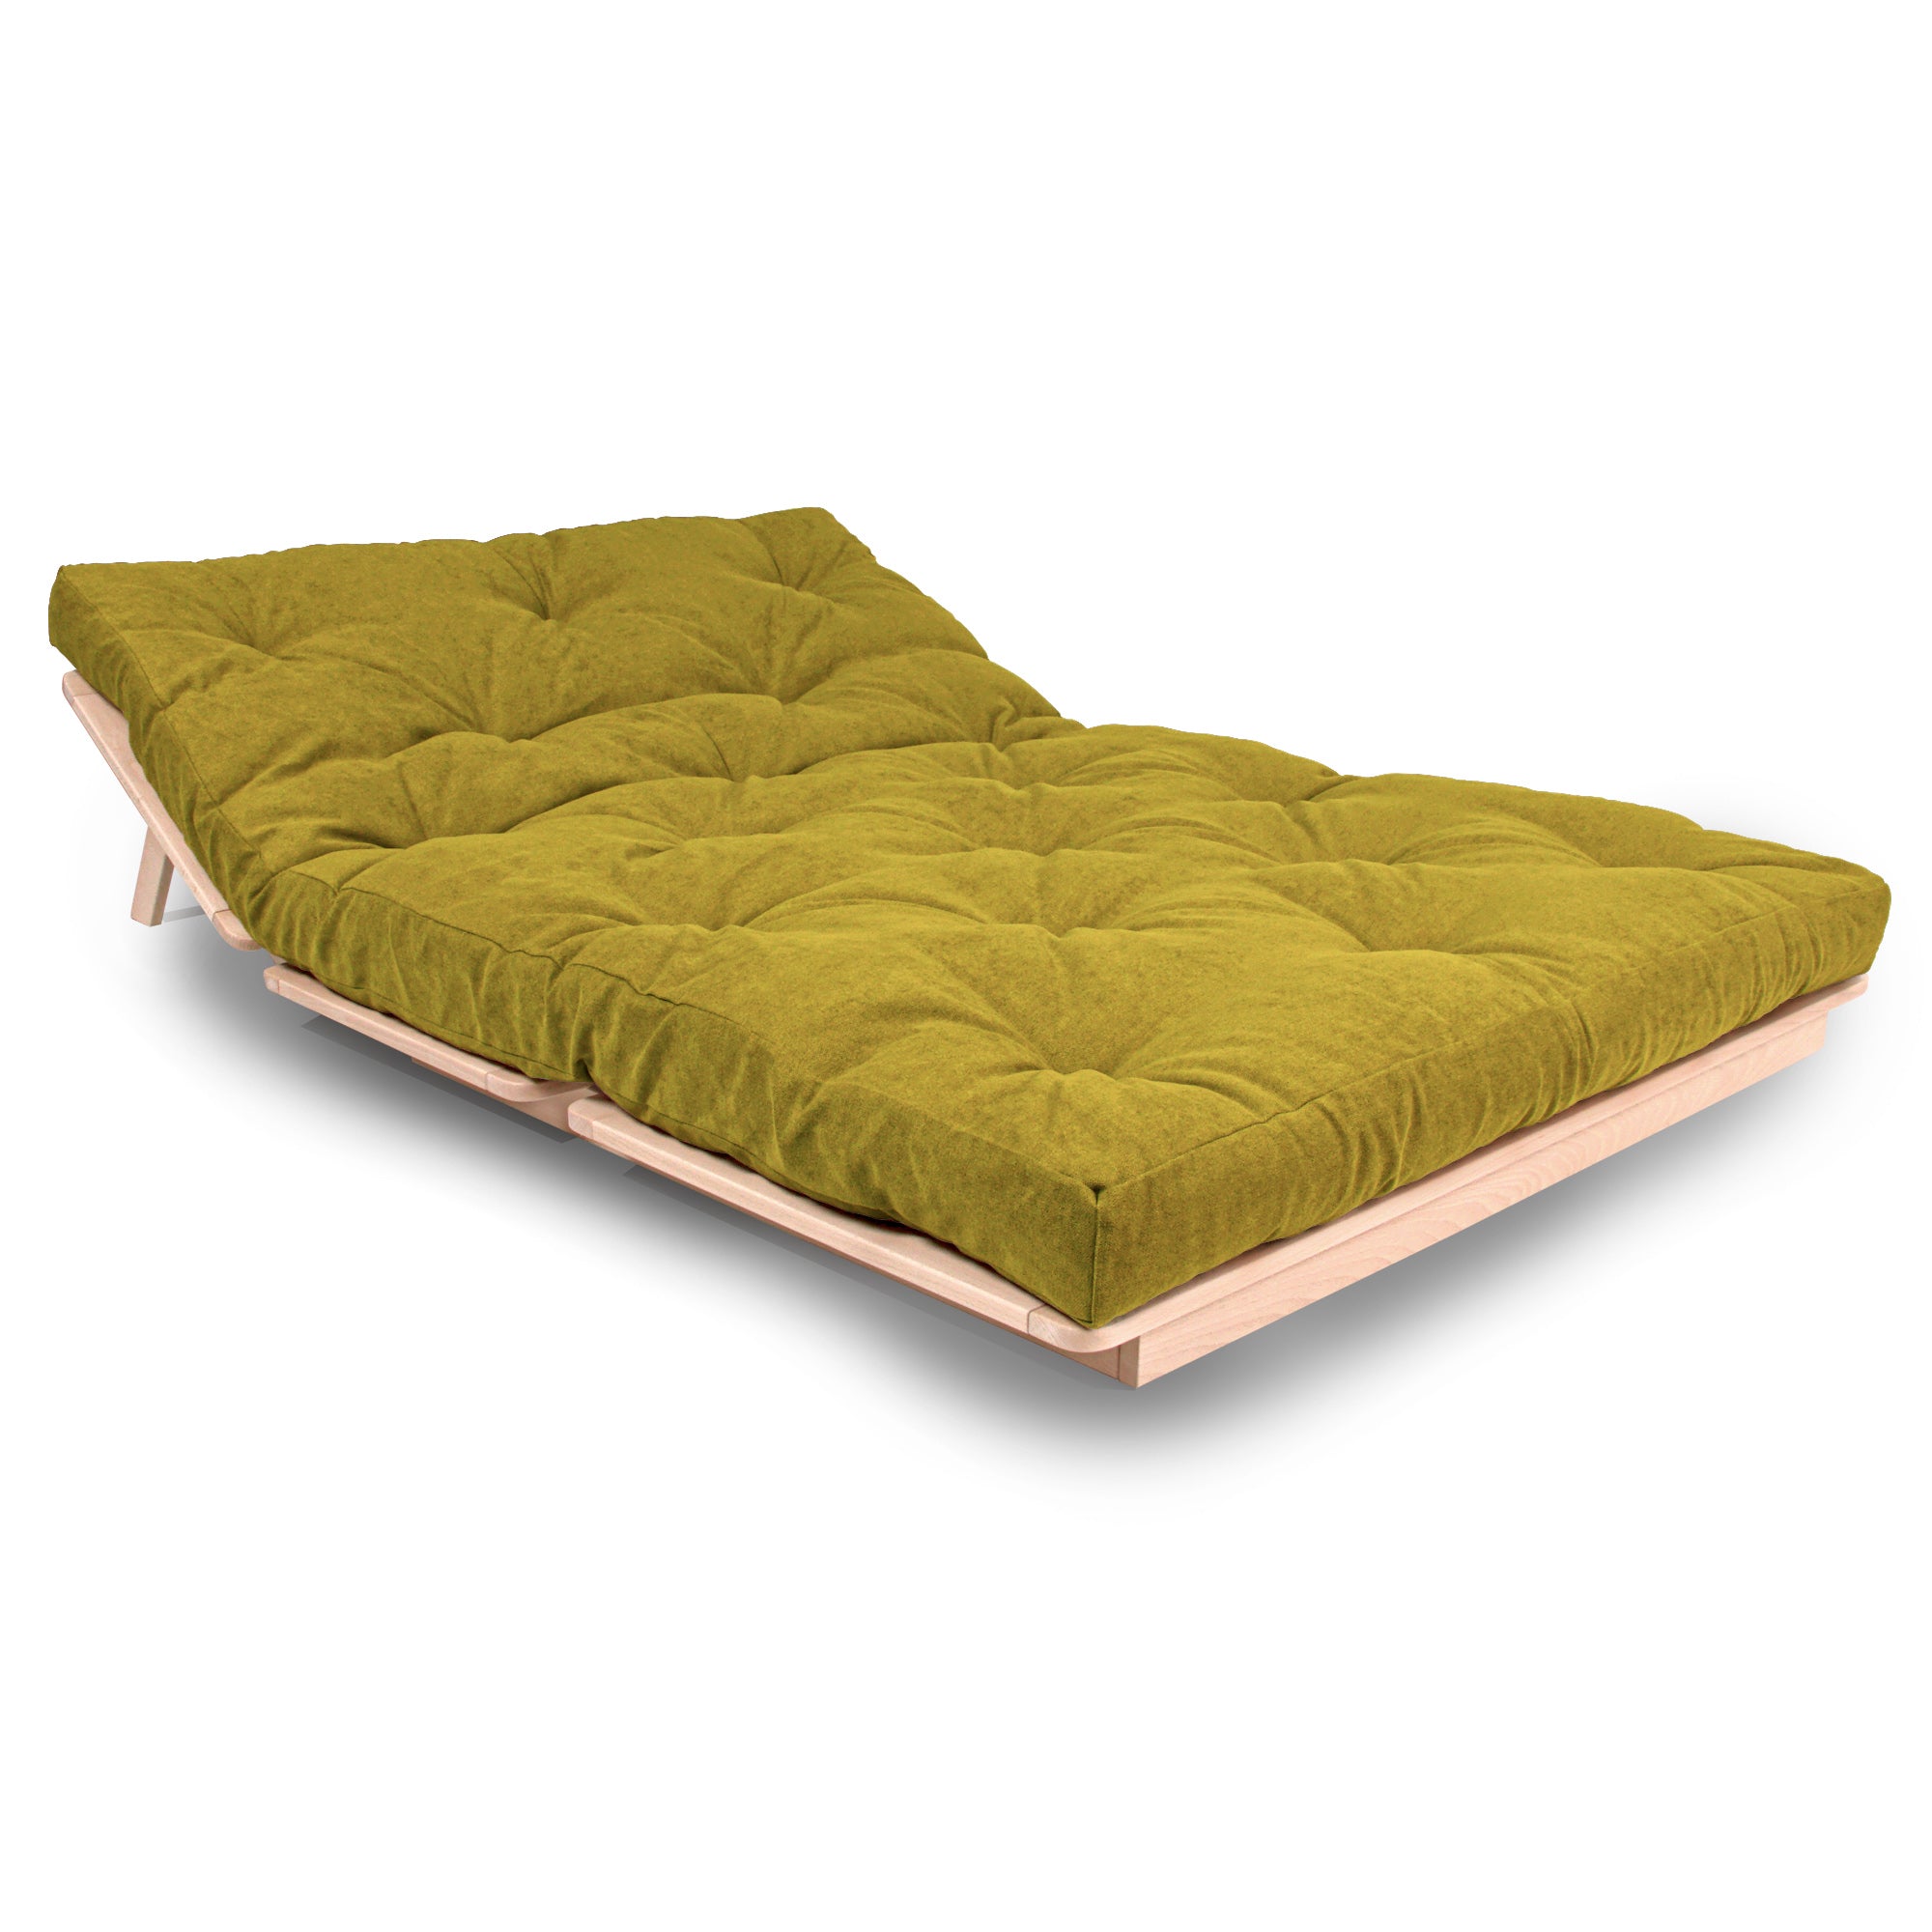 LAYTI-140 Double Futon Sofa Bed, Solid Beech Wood, Natural